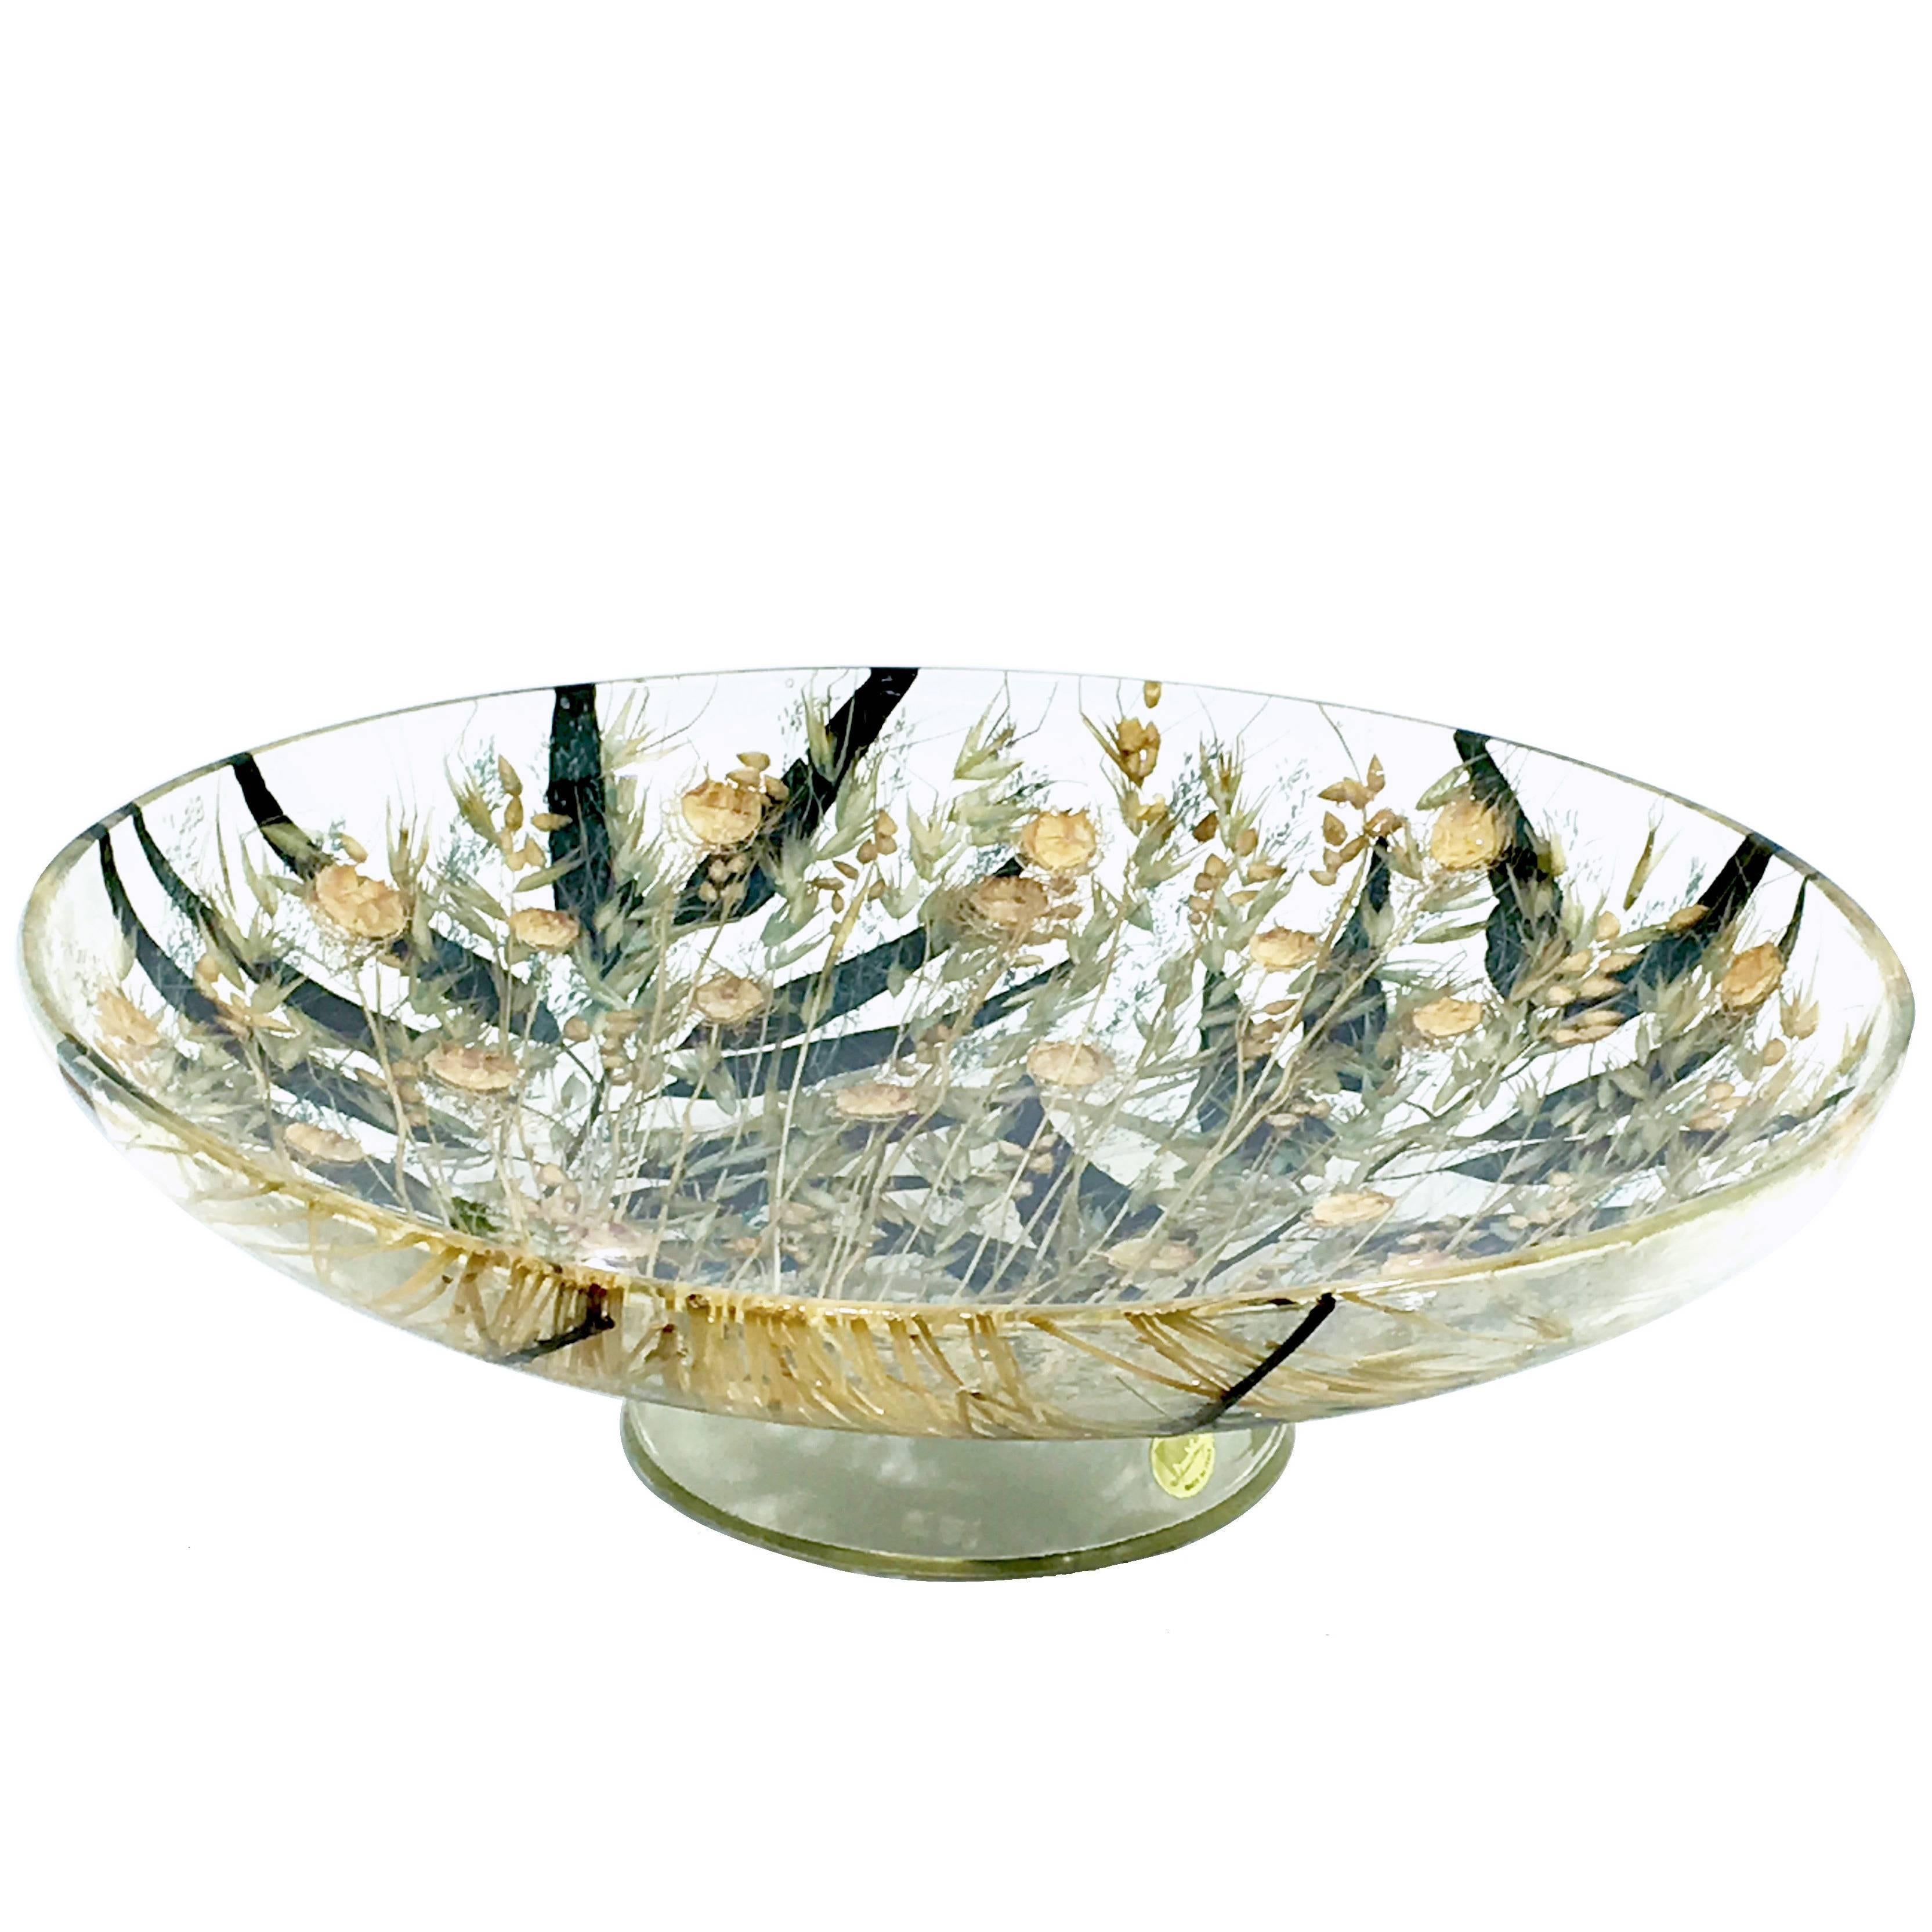 Decorative Plexiglass Bowl or Basket with Wheat Inclusions